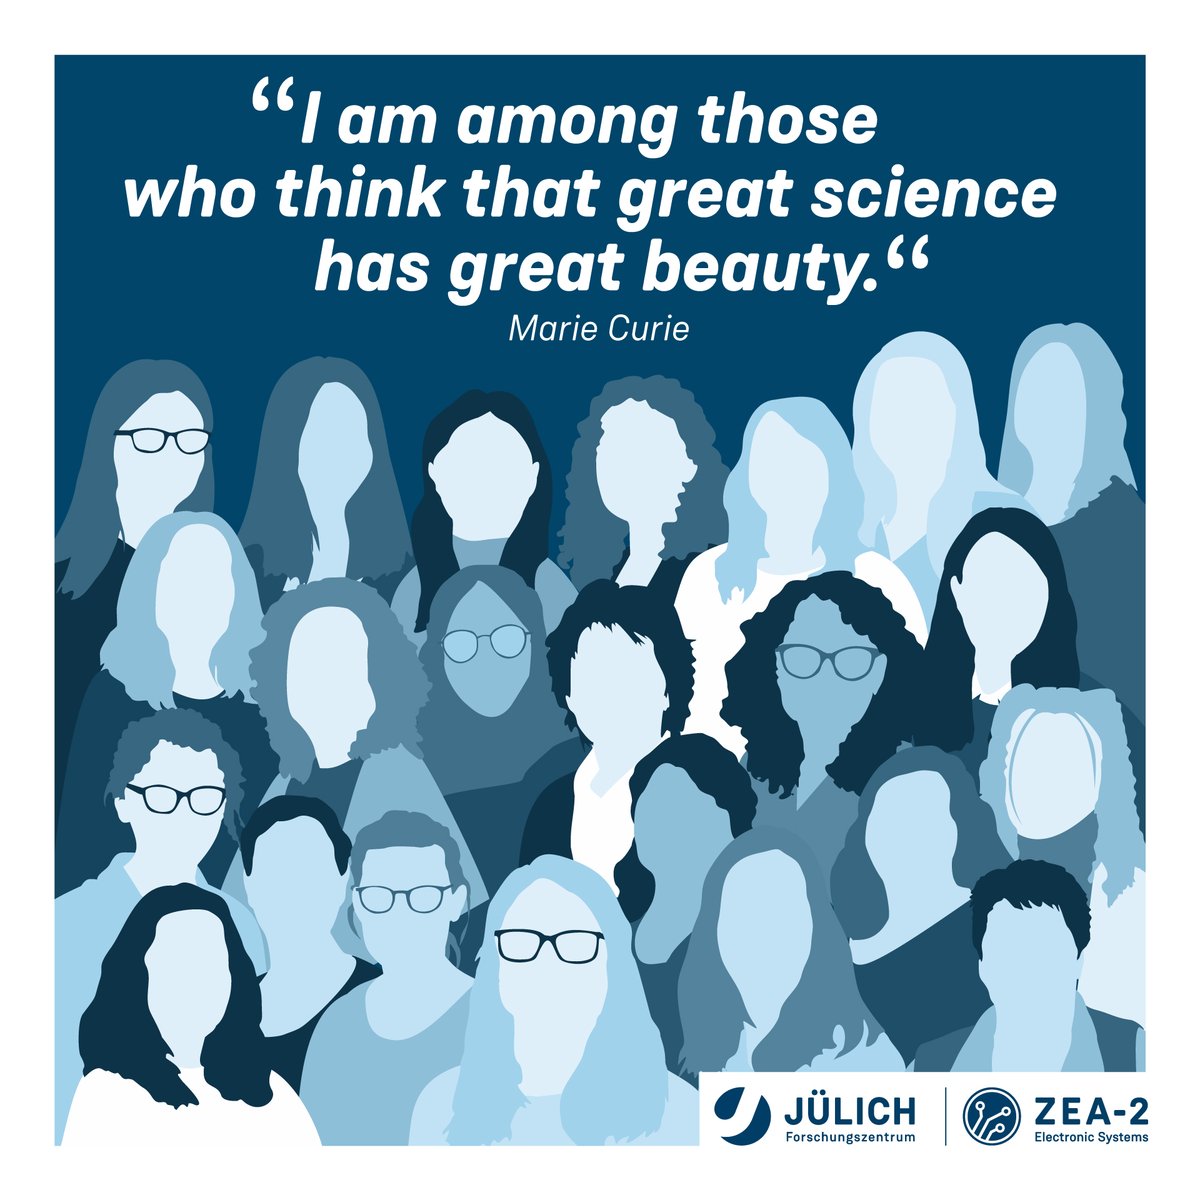 Happy International Women's Day! 🌟 Let's celebrate the achievements, resilience, & strength of women everywhere. From challenging norms to breaking barriers, women continue to shape our world for the better. 23 women are working at our institute, shaping the change @fz_juelich